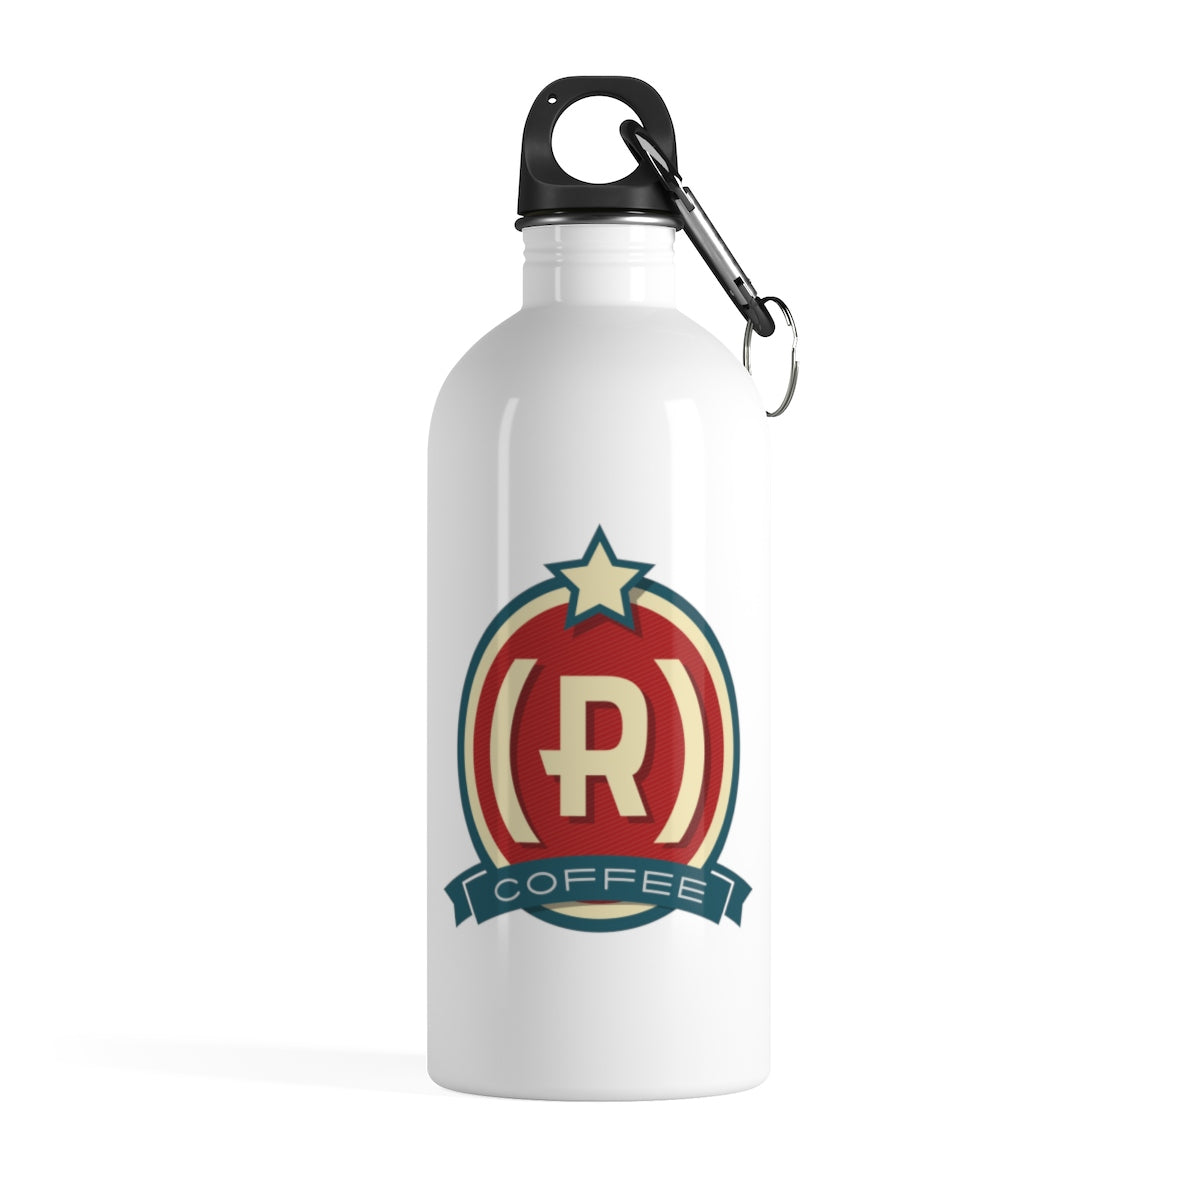 Republican Coffee - Classic Stainless Steel Water Bottle